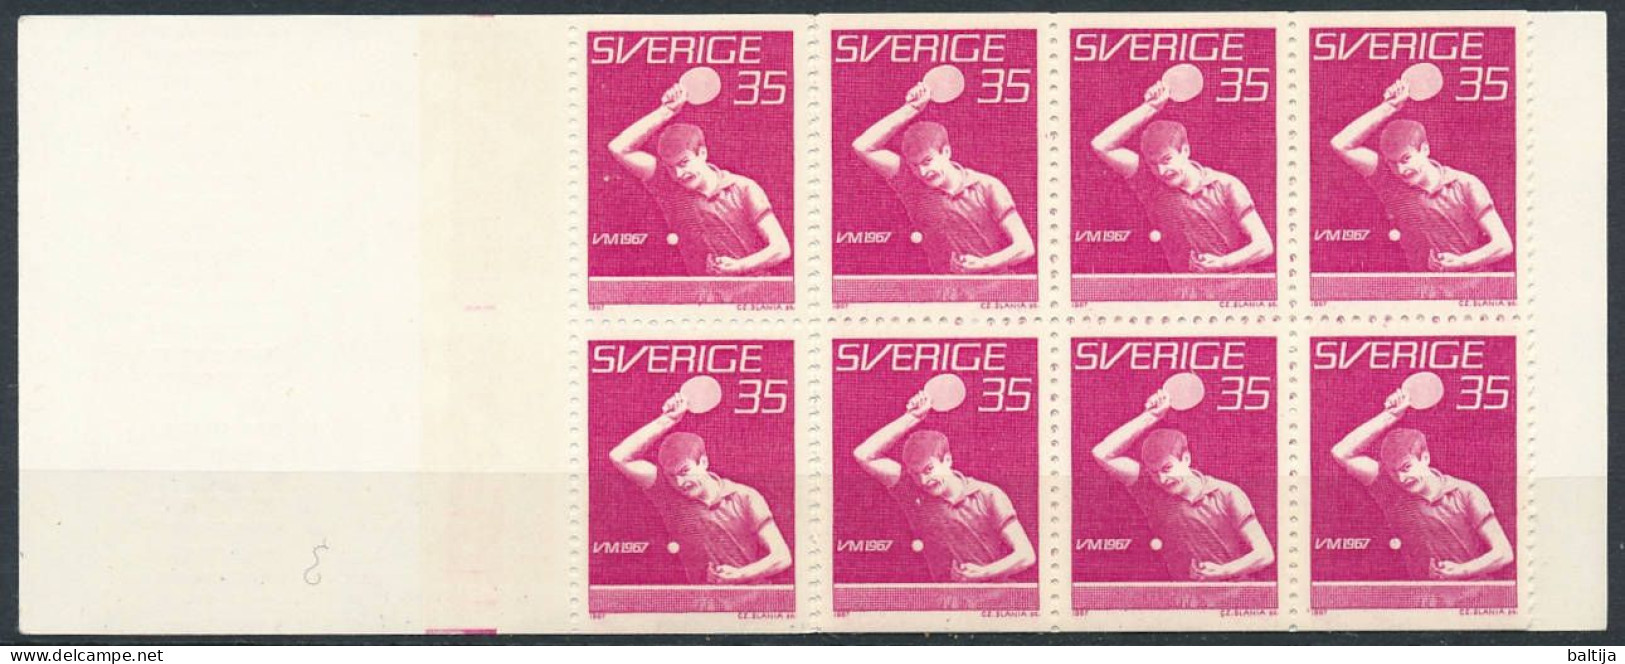 H.189 Booklet ** MNH / 1967 World Championships Table Tennis, Ping Pong - Table Tennis